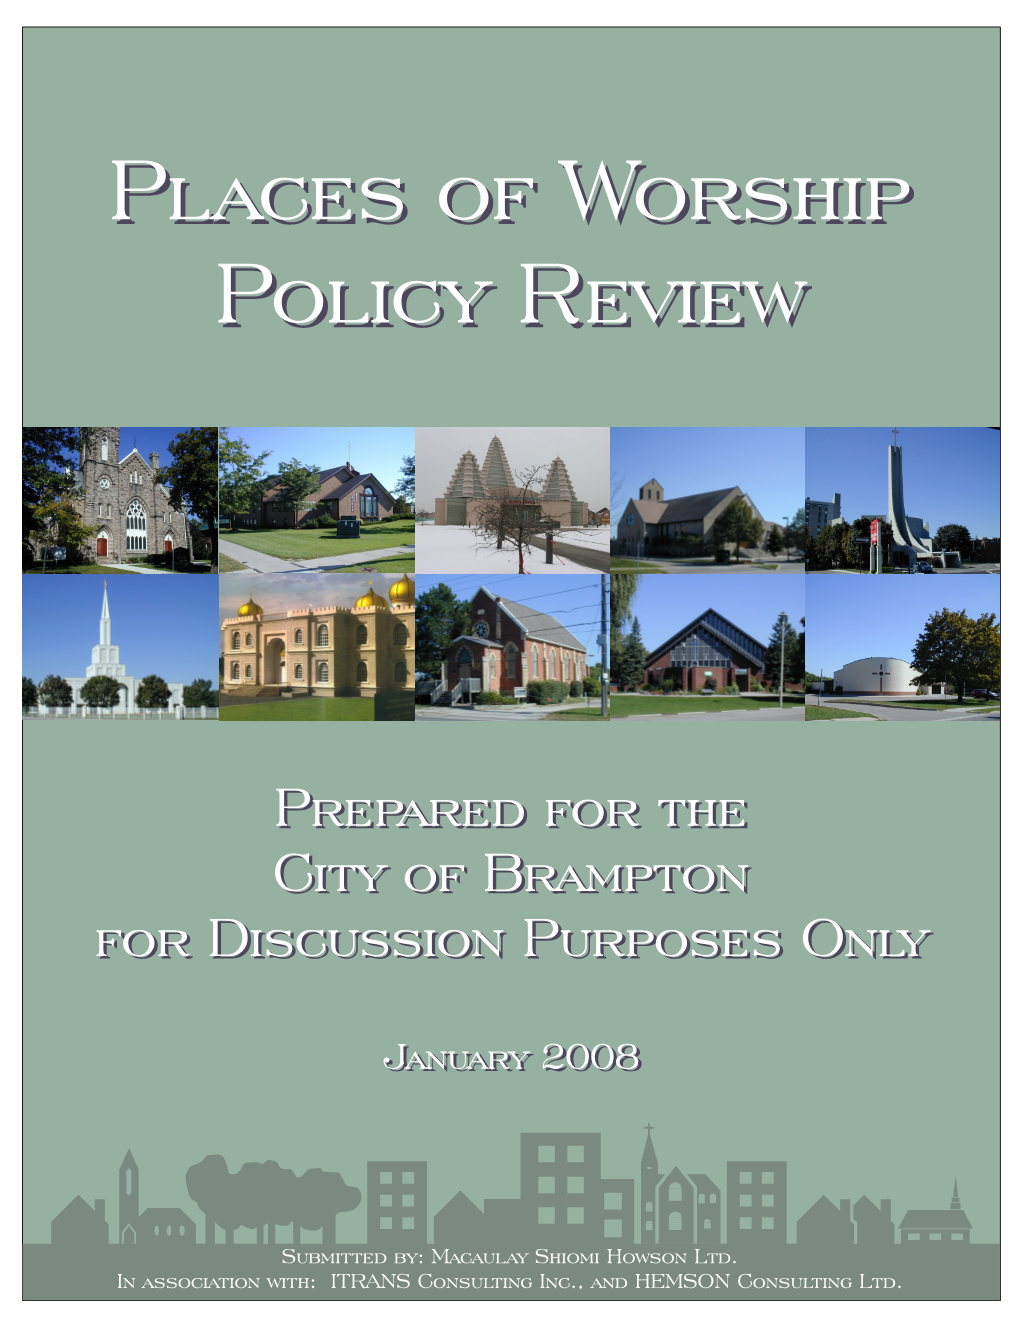 Places of Worship Policy Review